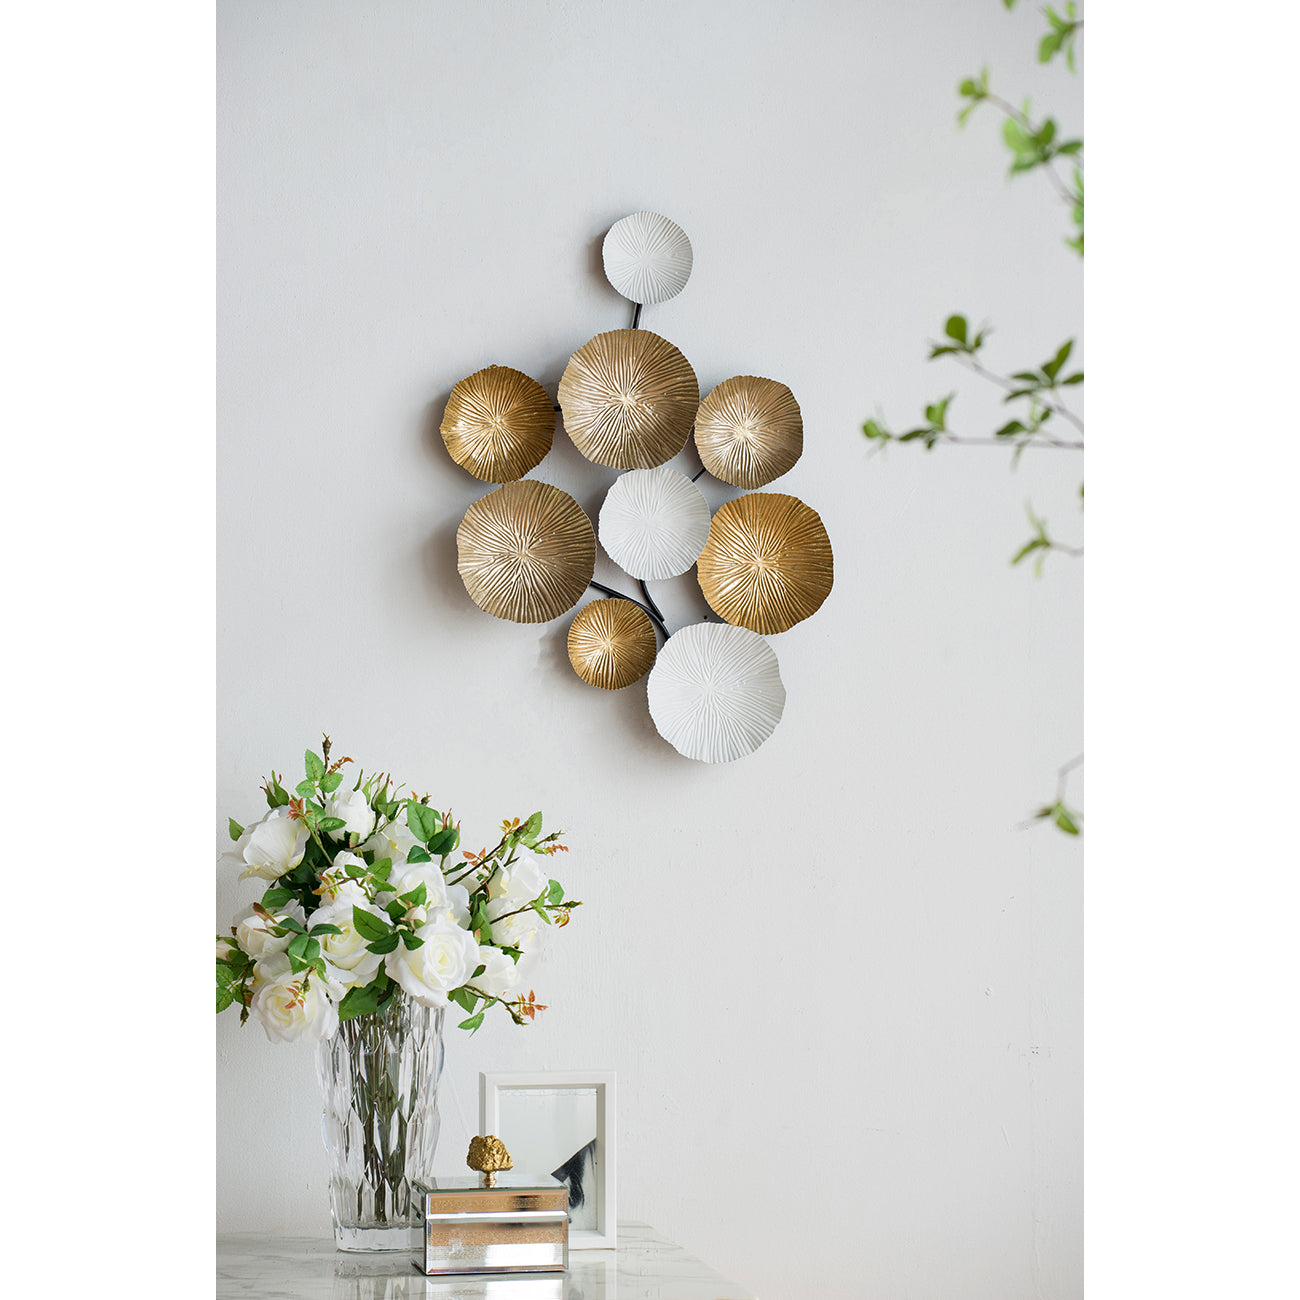 Contemporary Metal Wall Decor Accent (24.5 x 18")